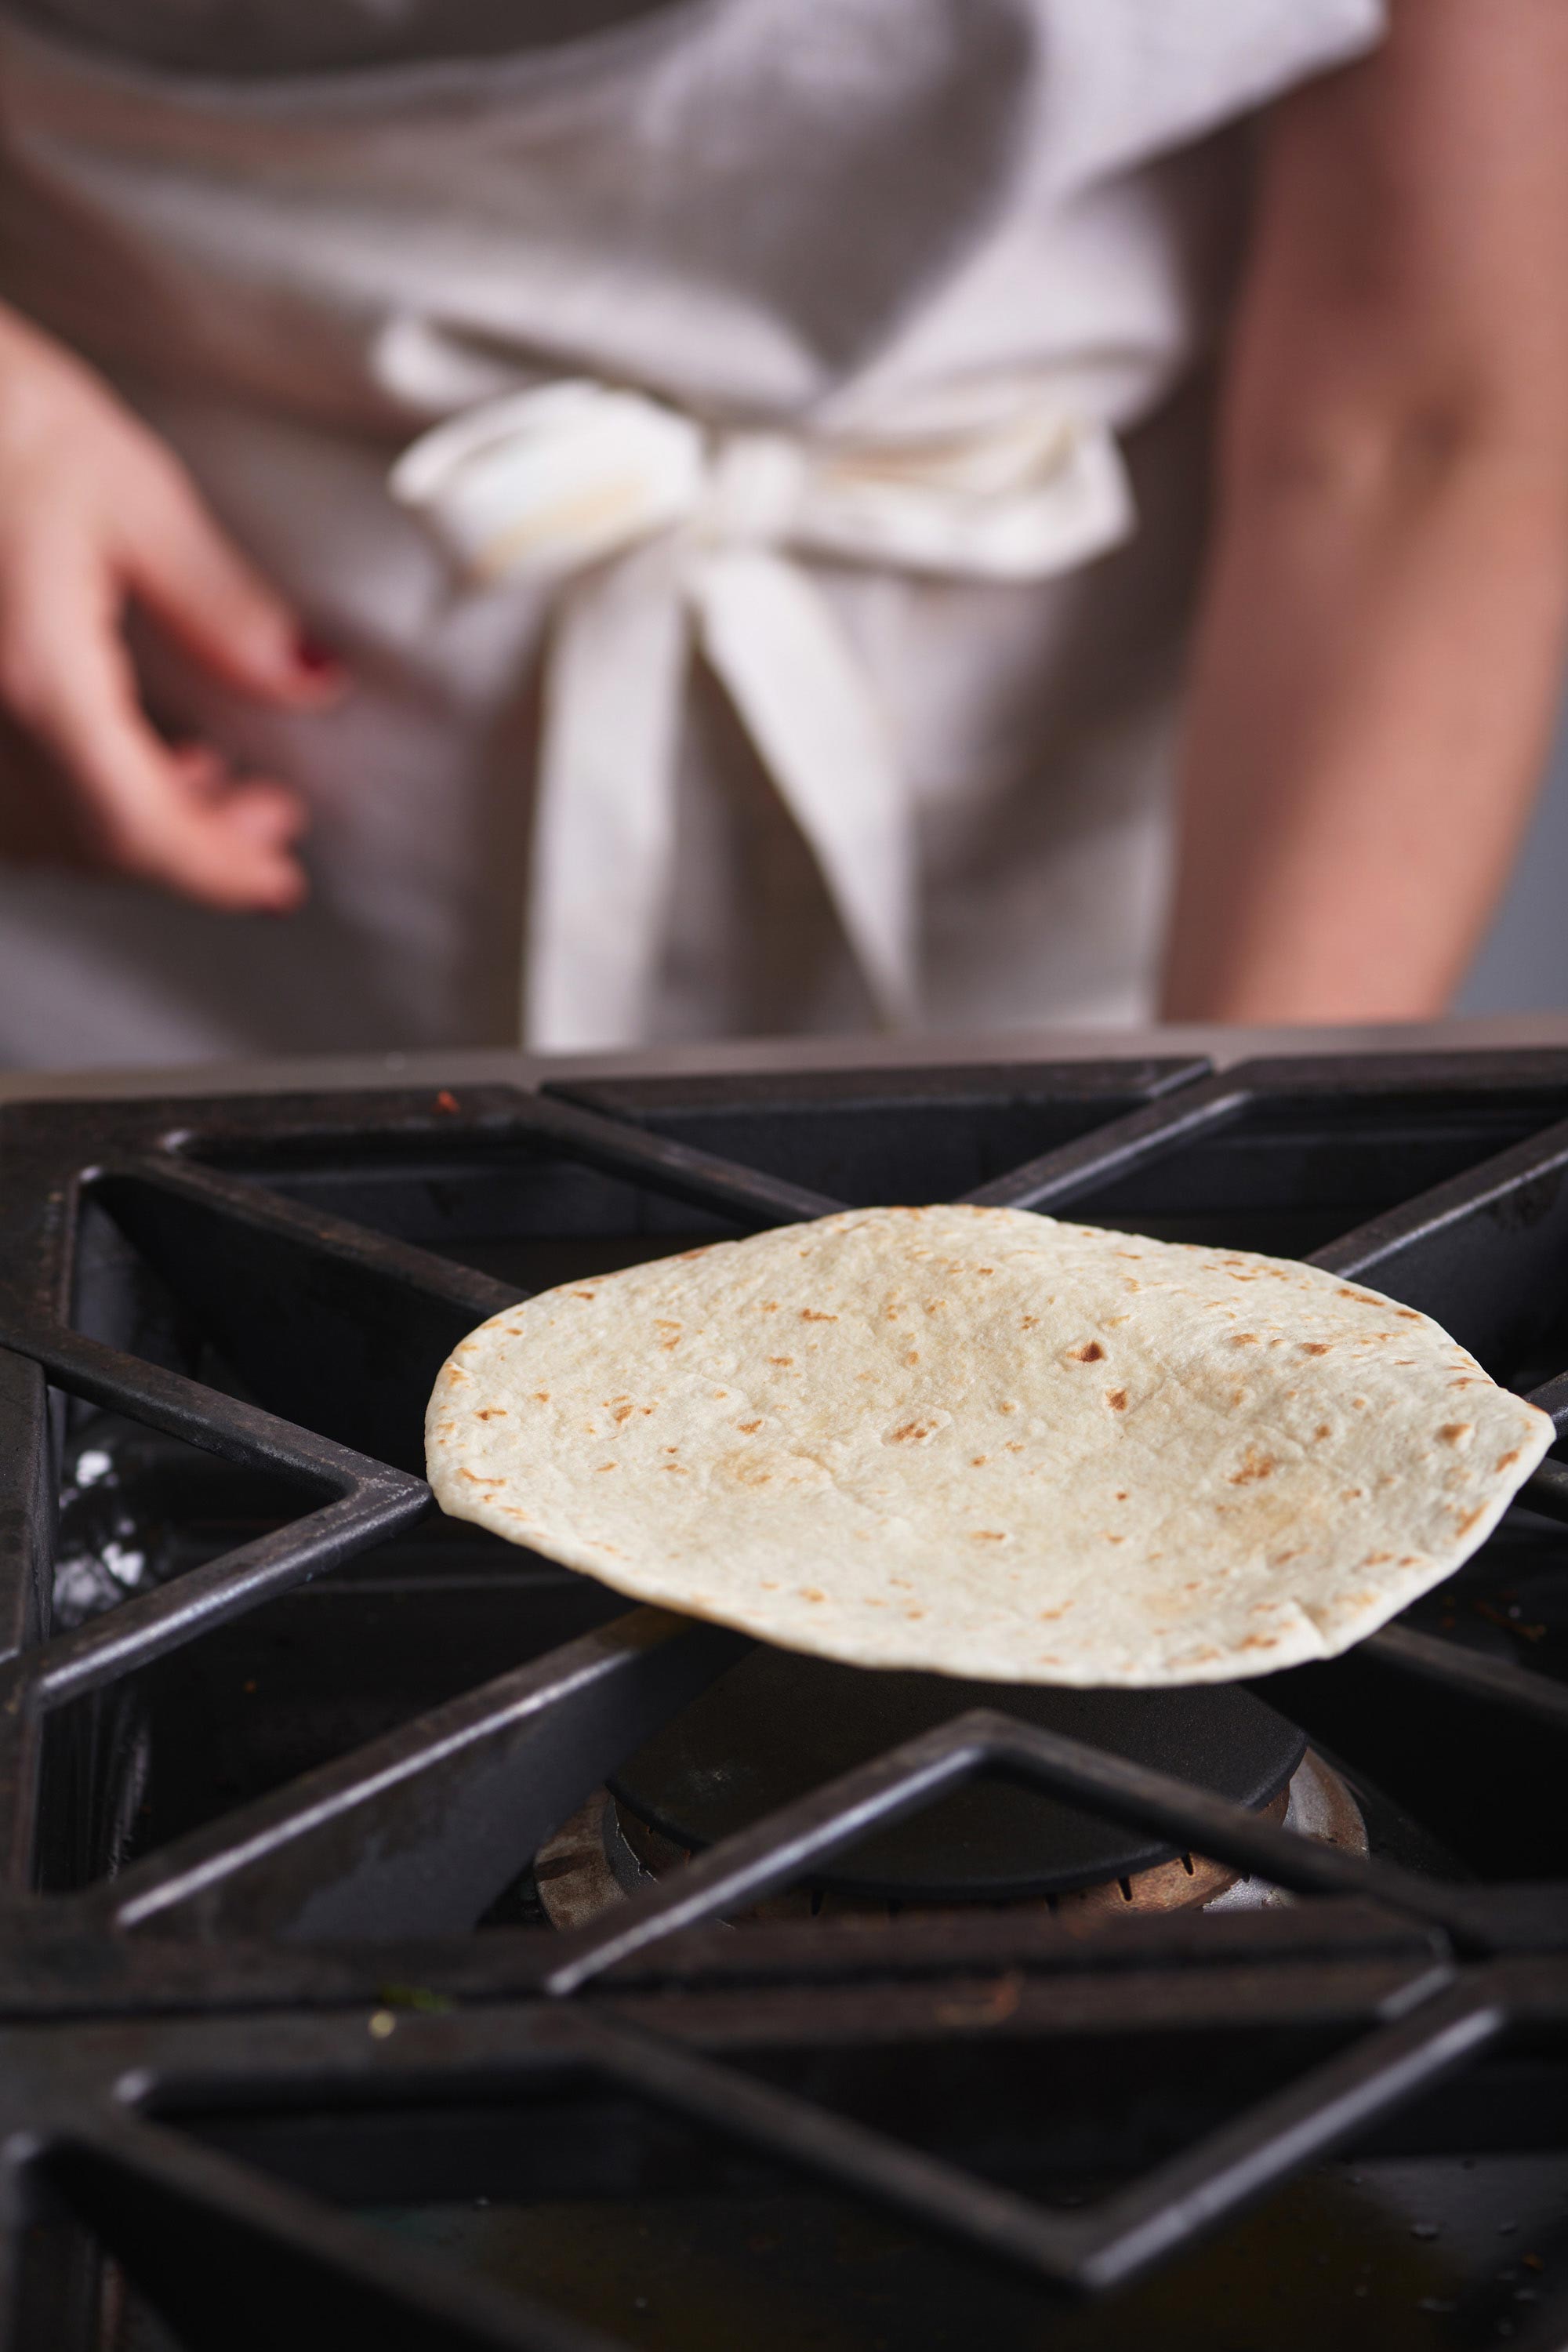 Put your store bought flour tortillas on a hot, ungreased pan for a few  minutes per side. It activates the fats and makes the tortilla chewy and  soft. : r/foodhacks